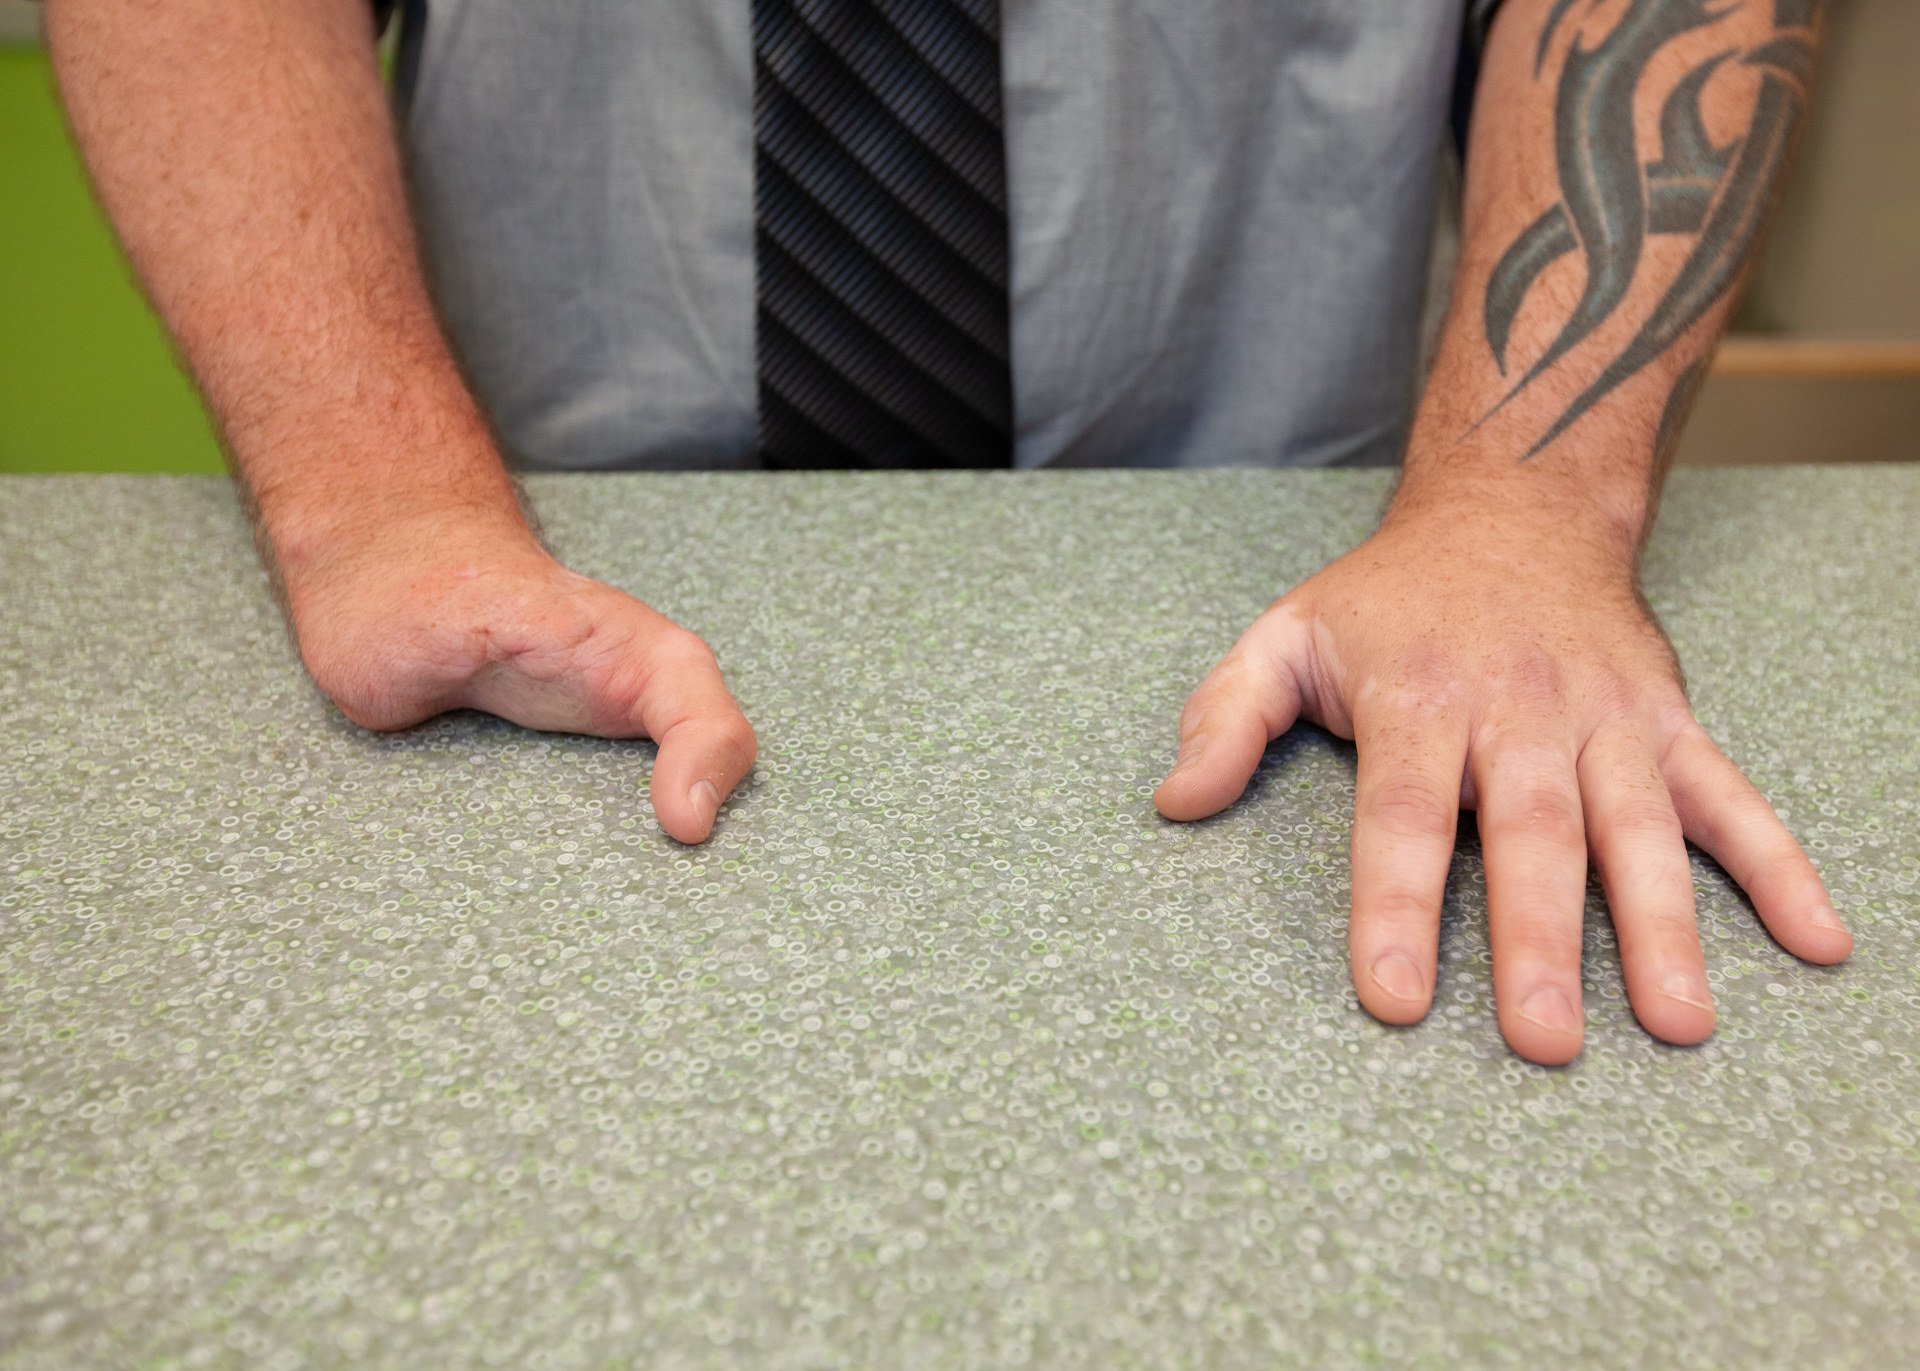 A partial hand patient without his prosthesis